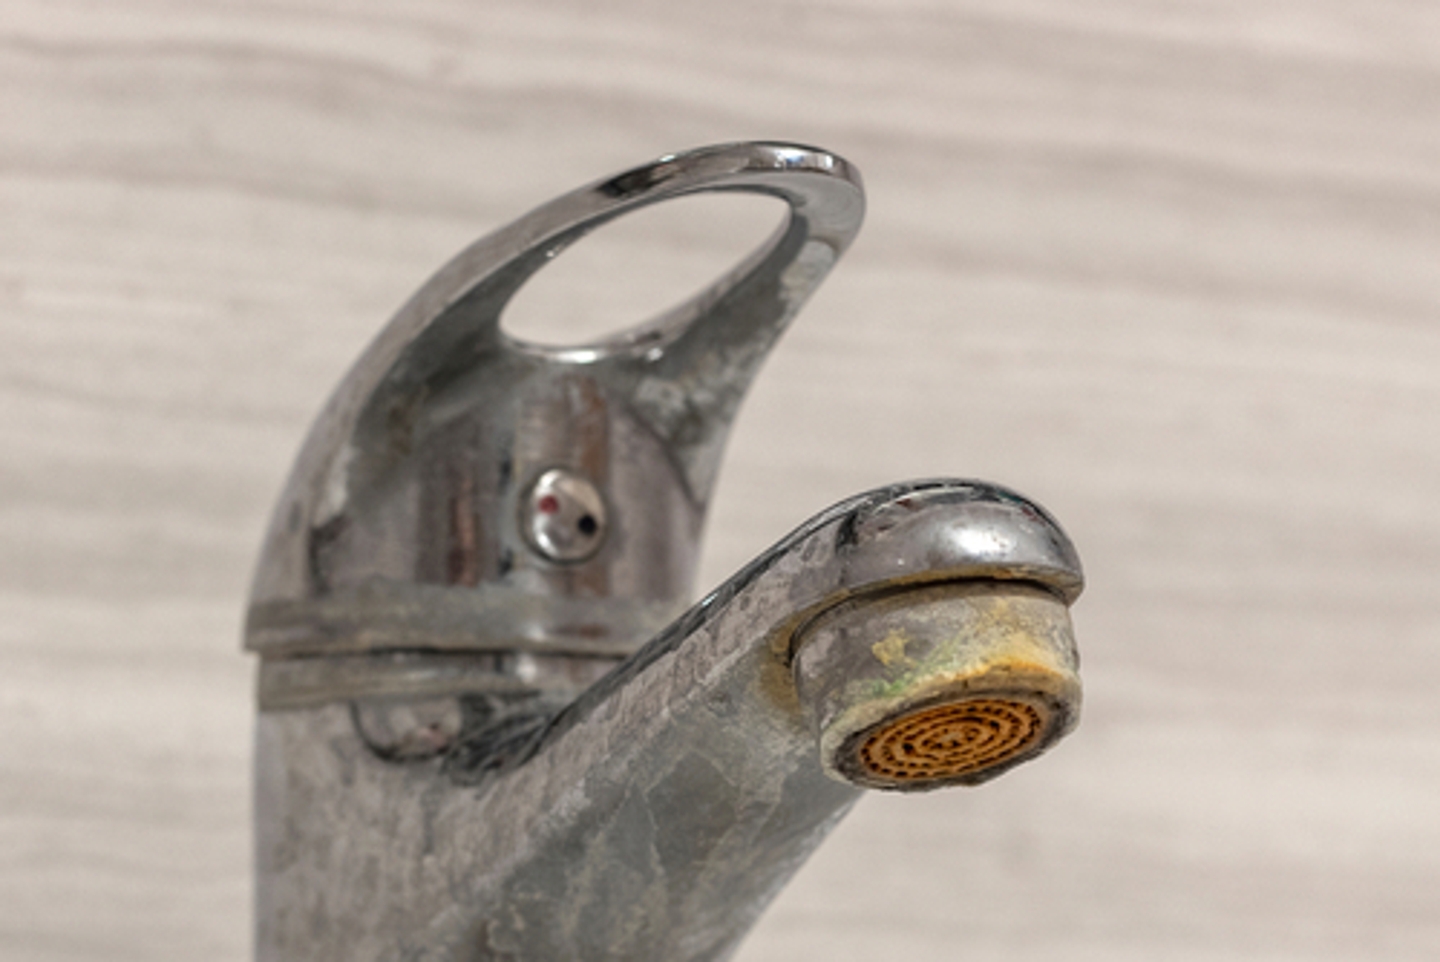 Cleaning a rusty or dirty chrome shower head or bathroom faucet can be challenging. SERVPRO has some tips to help make the job go 